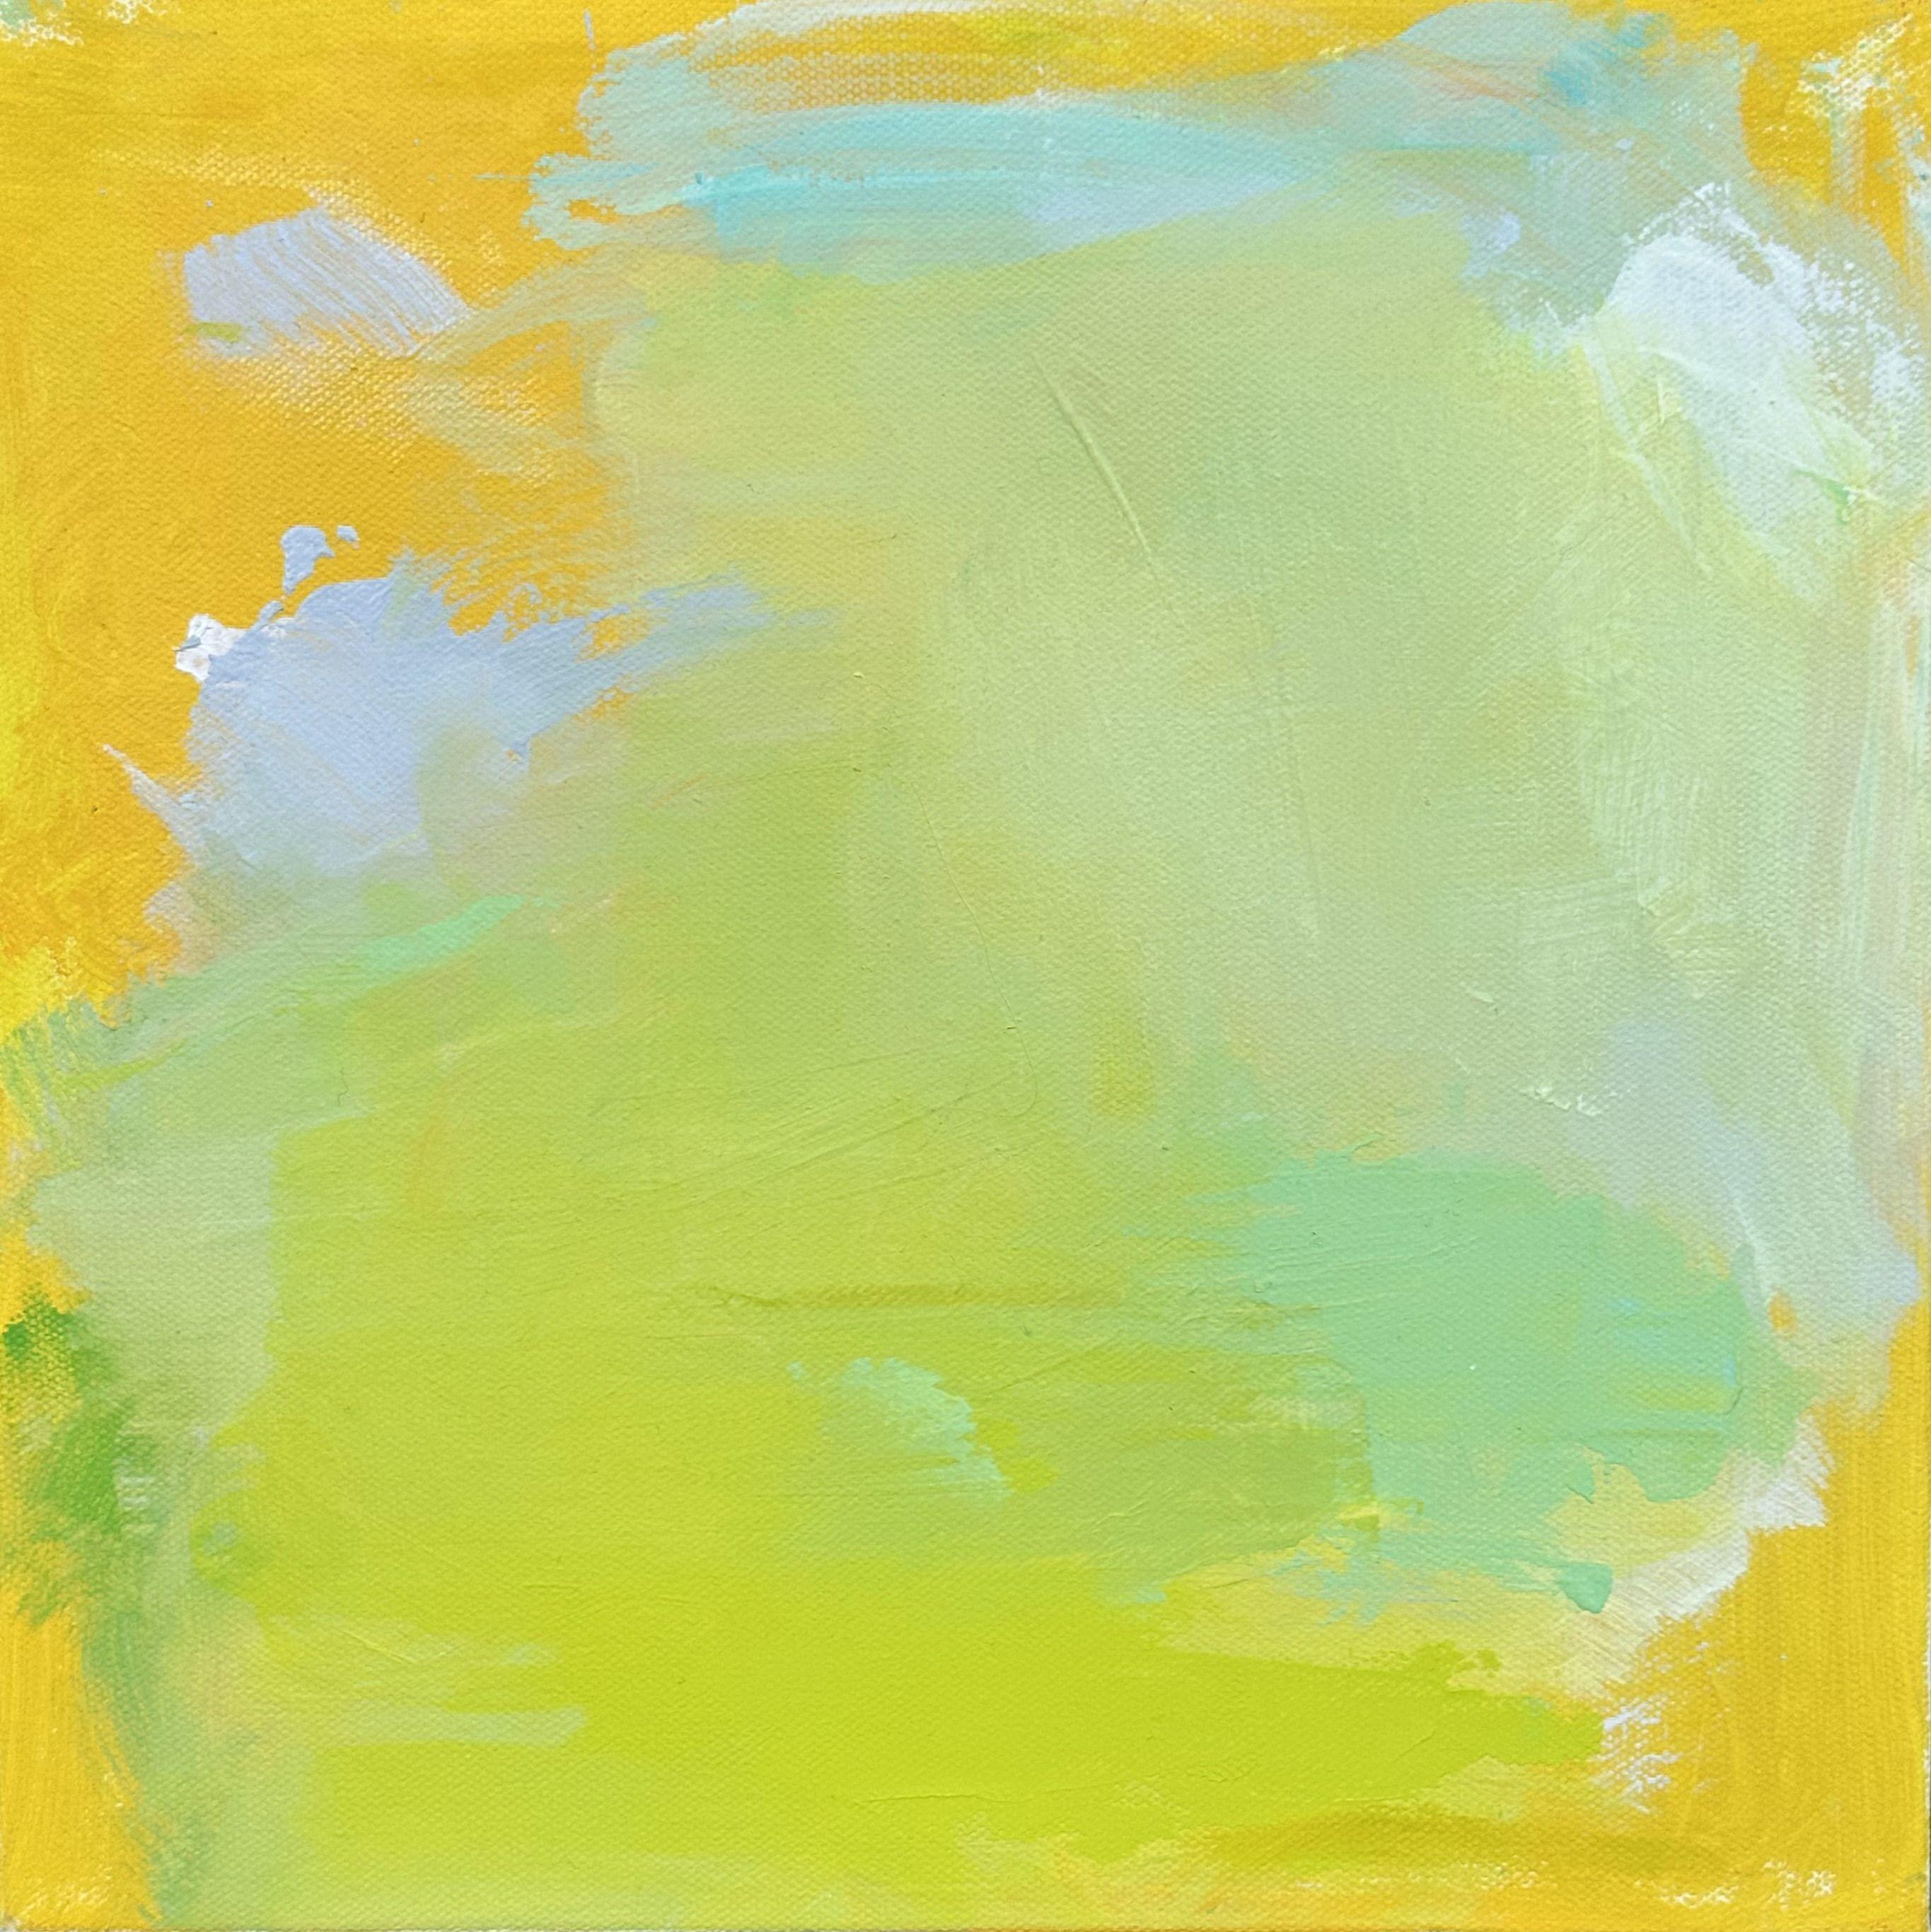 "Spring Palette 3" is a bright little abstract expressionist oil painting on canvas by Trixie Pitts. The palette is delightfully fresh and uplifting and consists of bright warm yellow, chartreuse, light green, robin's egg turquoise, sky blue and